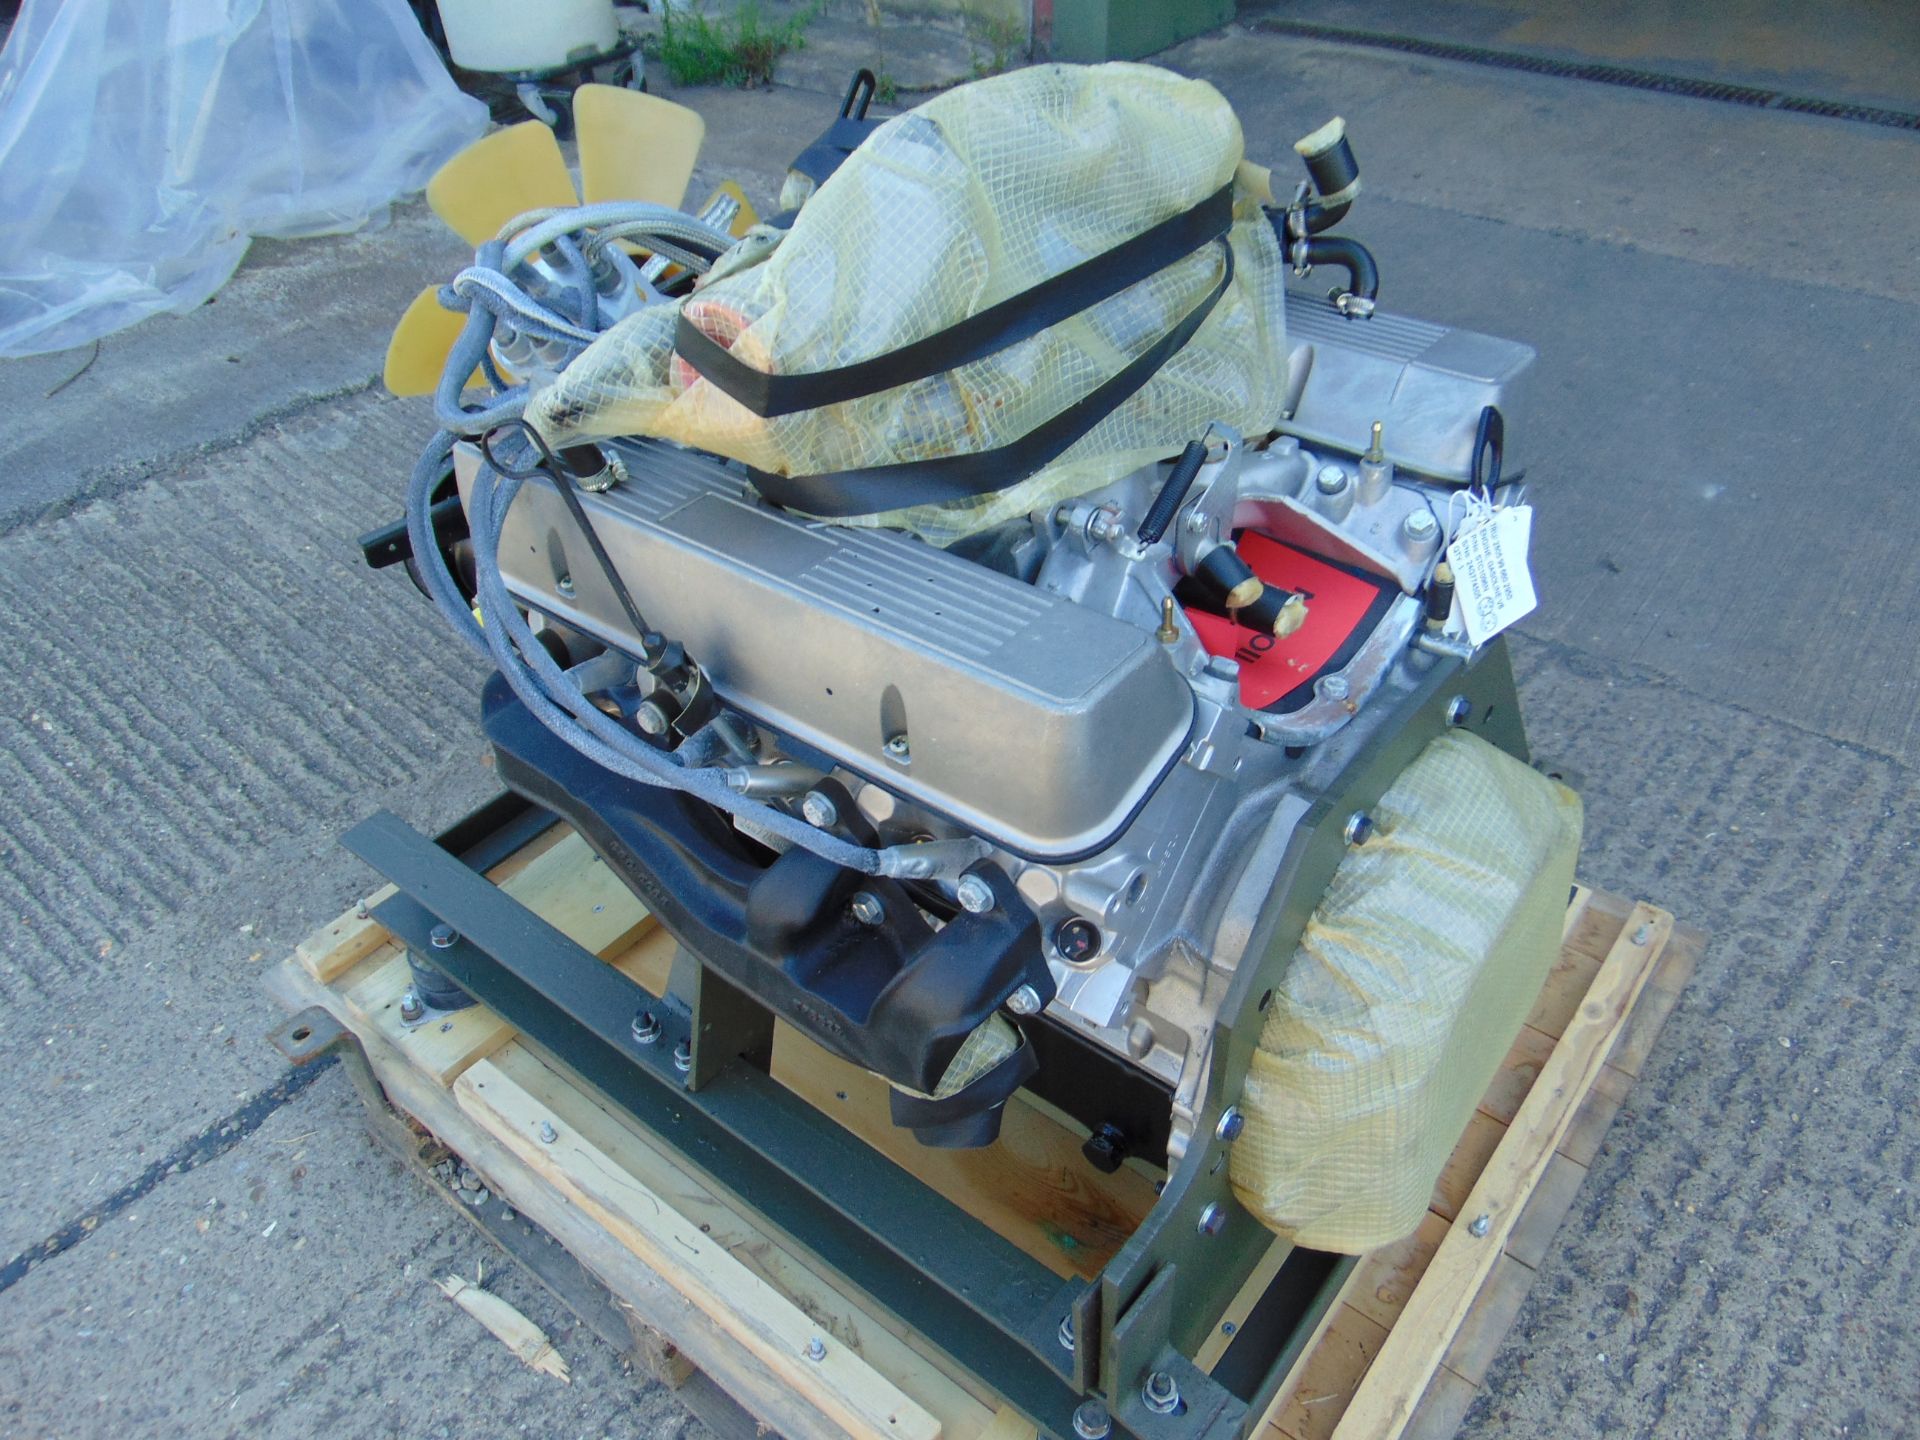 Fully Reconditioned Land Rover V8 Engine c/w all Accessories, as shown in Crate etc - Image 8 of 21